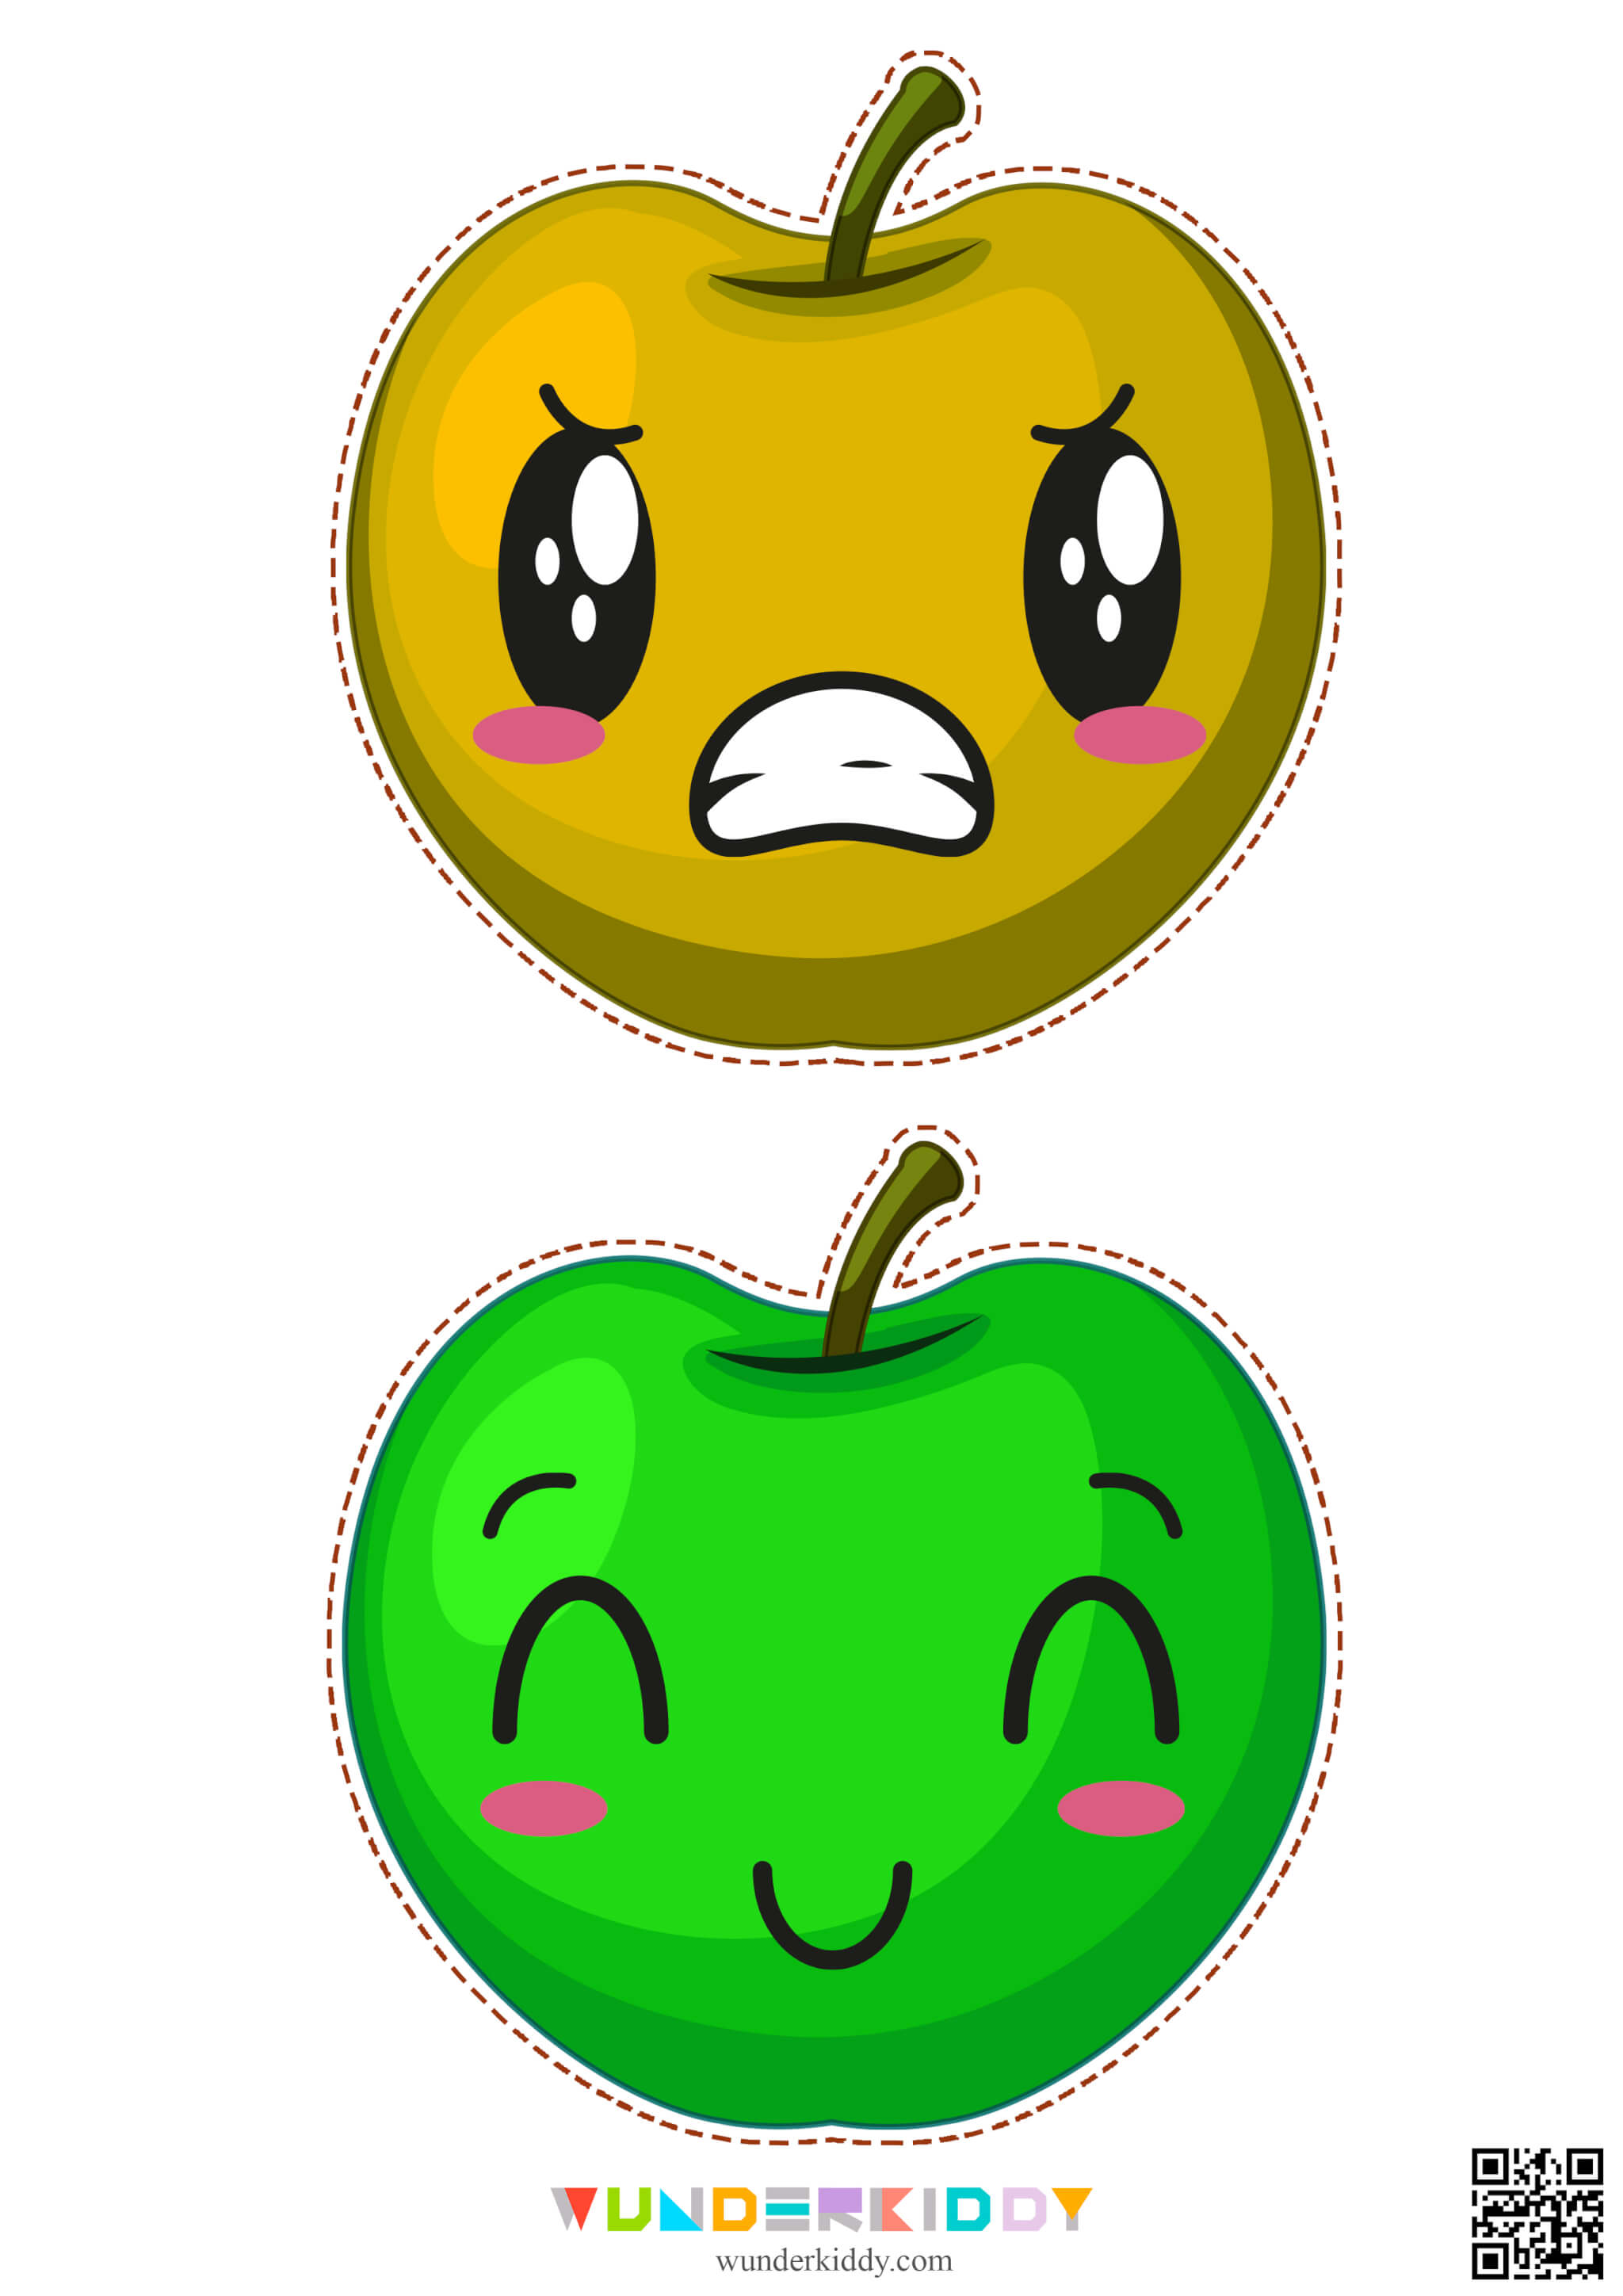 Template «Apples» - Image 3